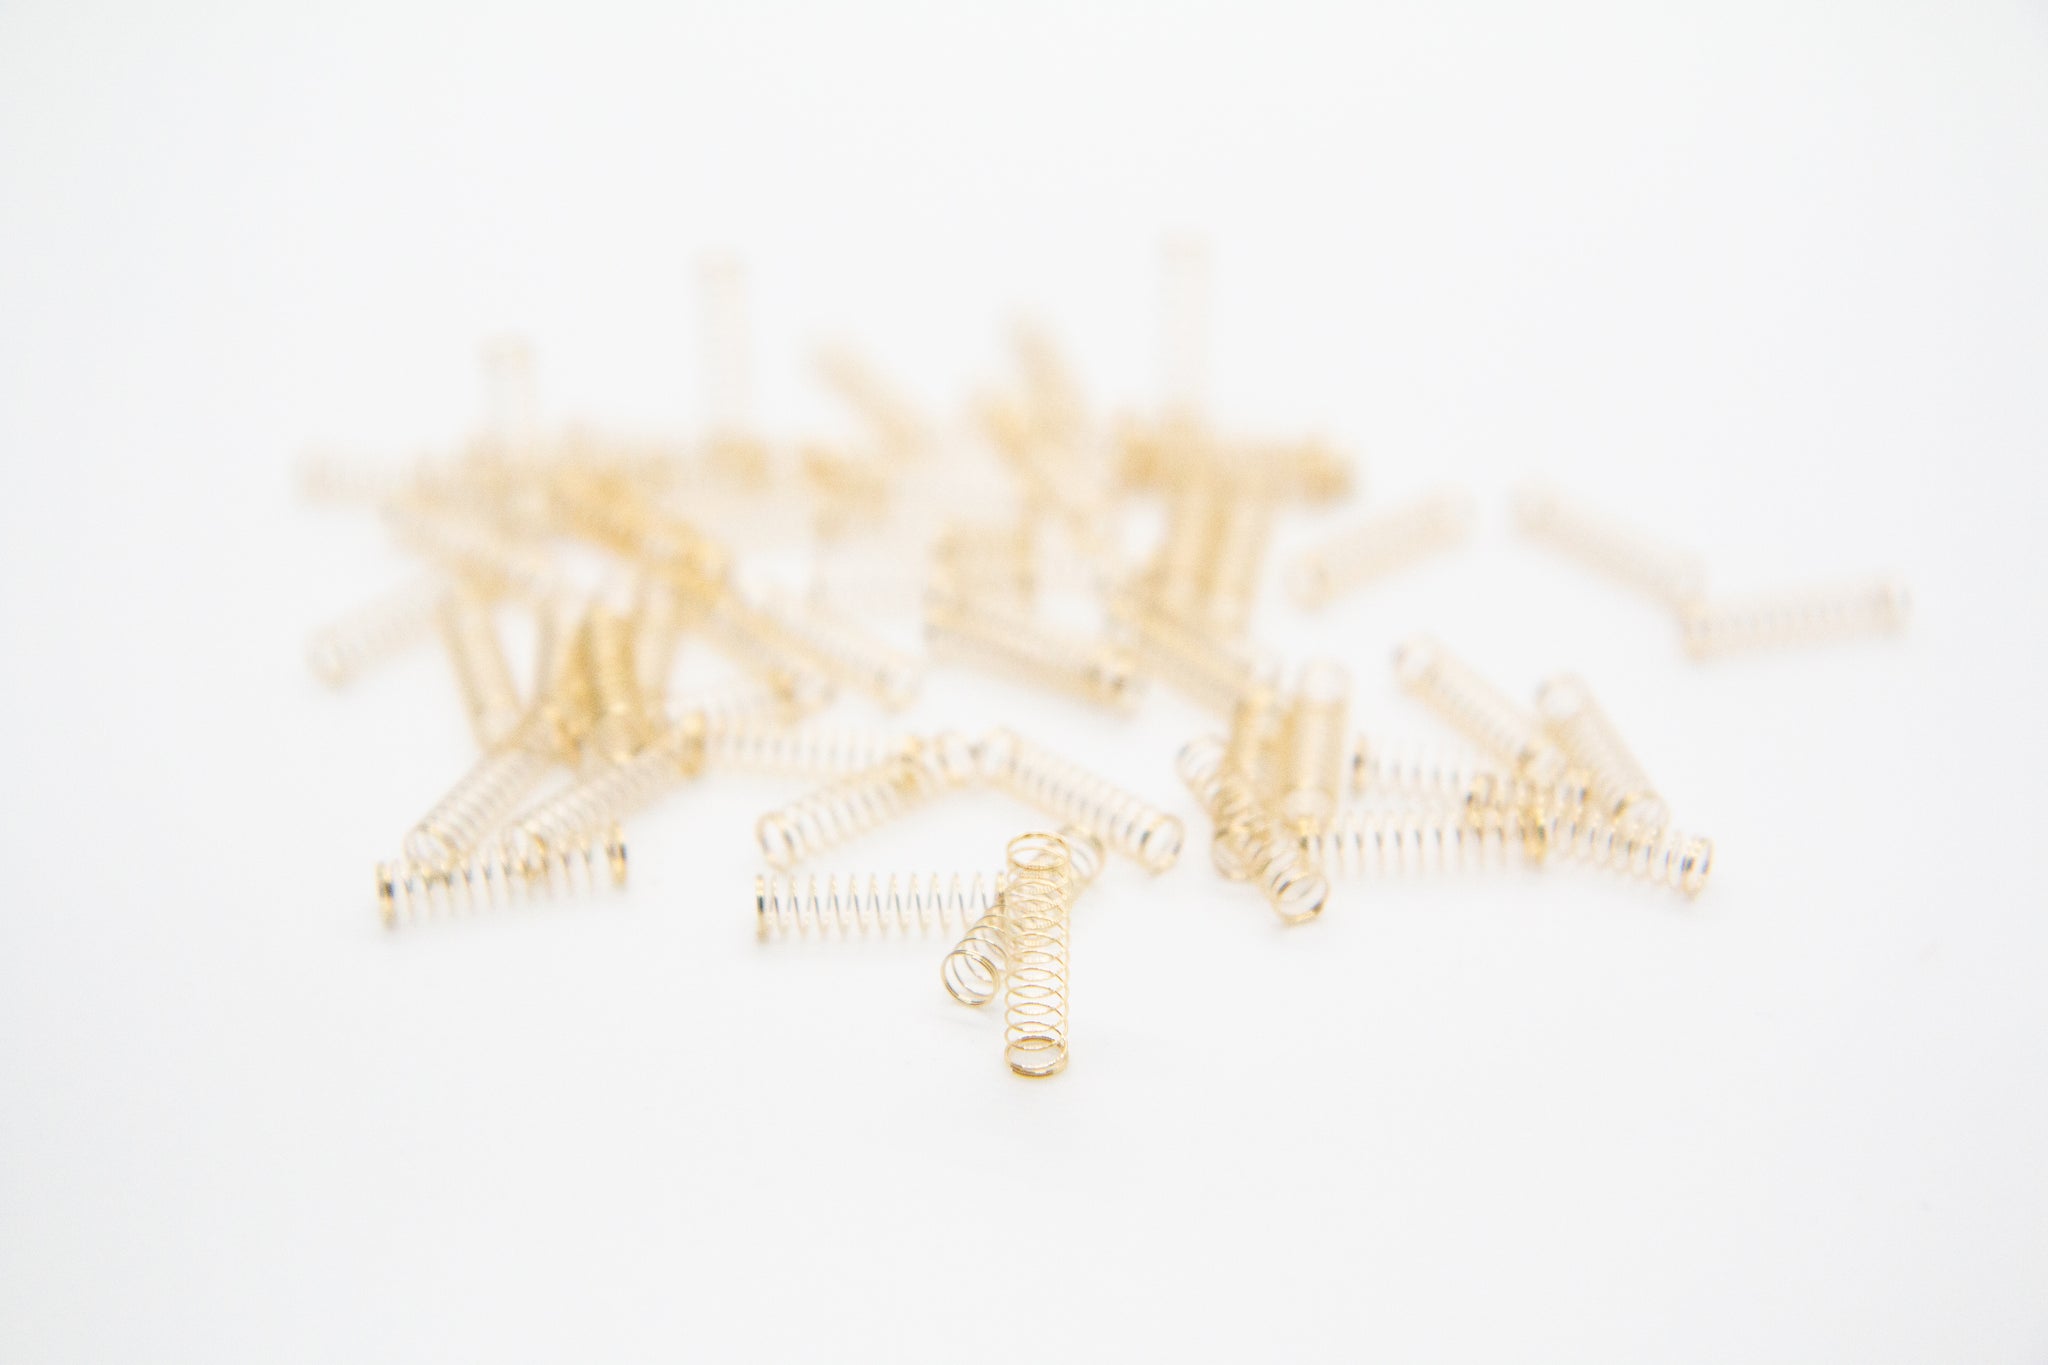 Durock Gold Plated Springs - 55g